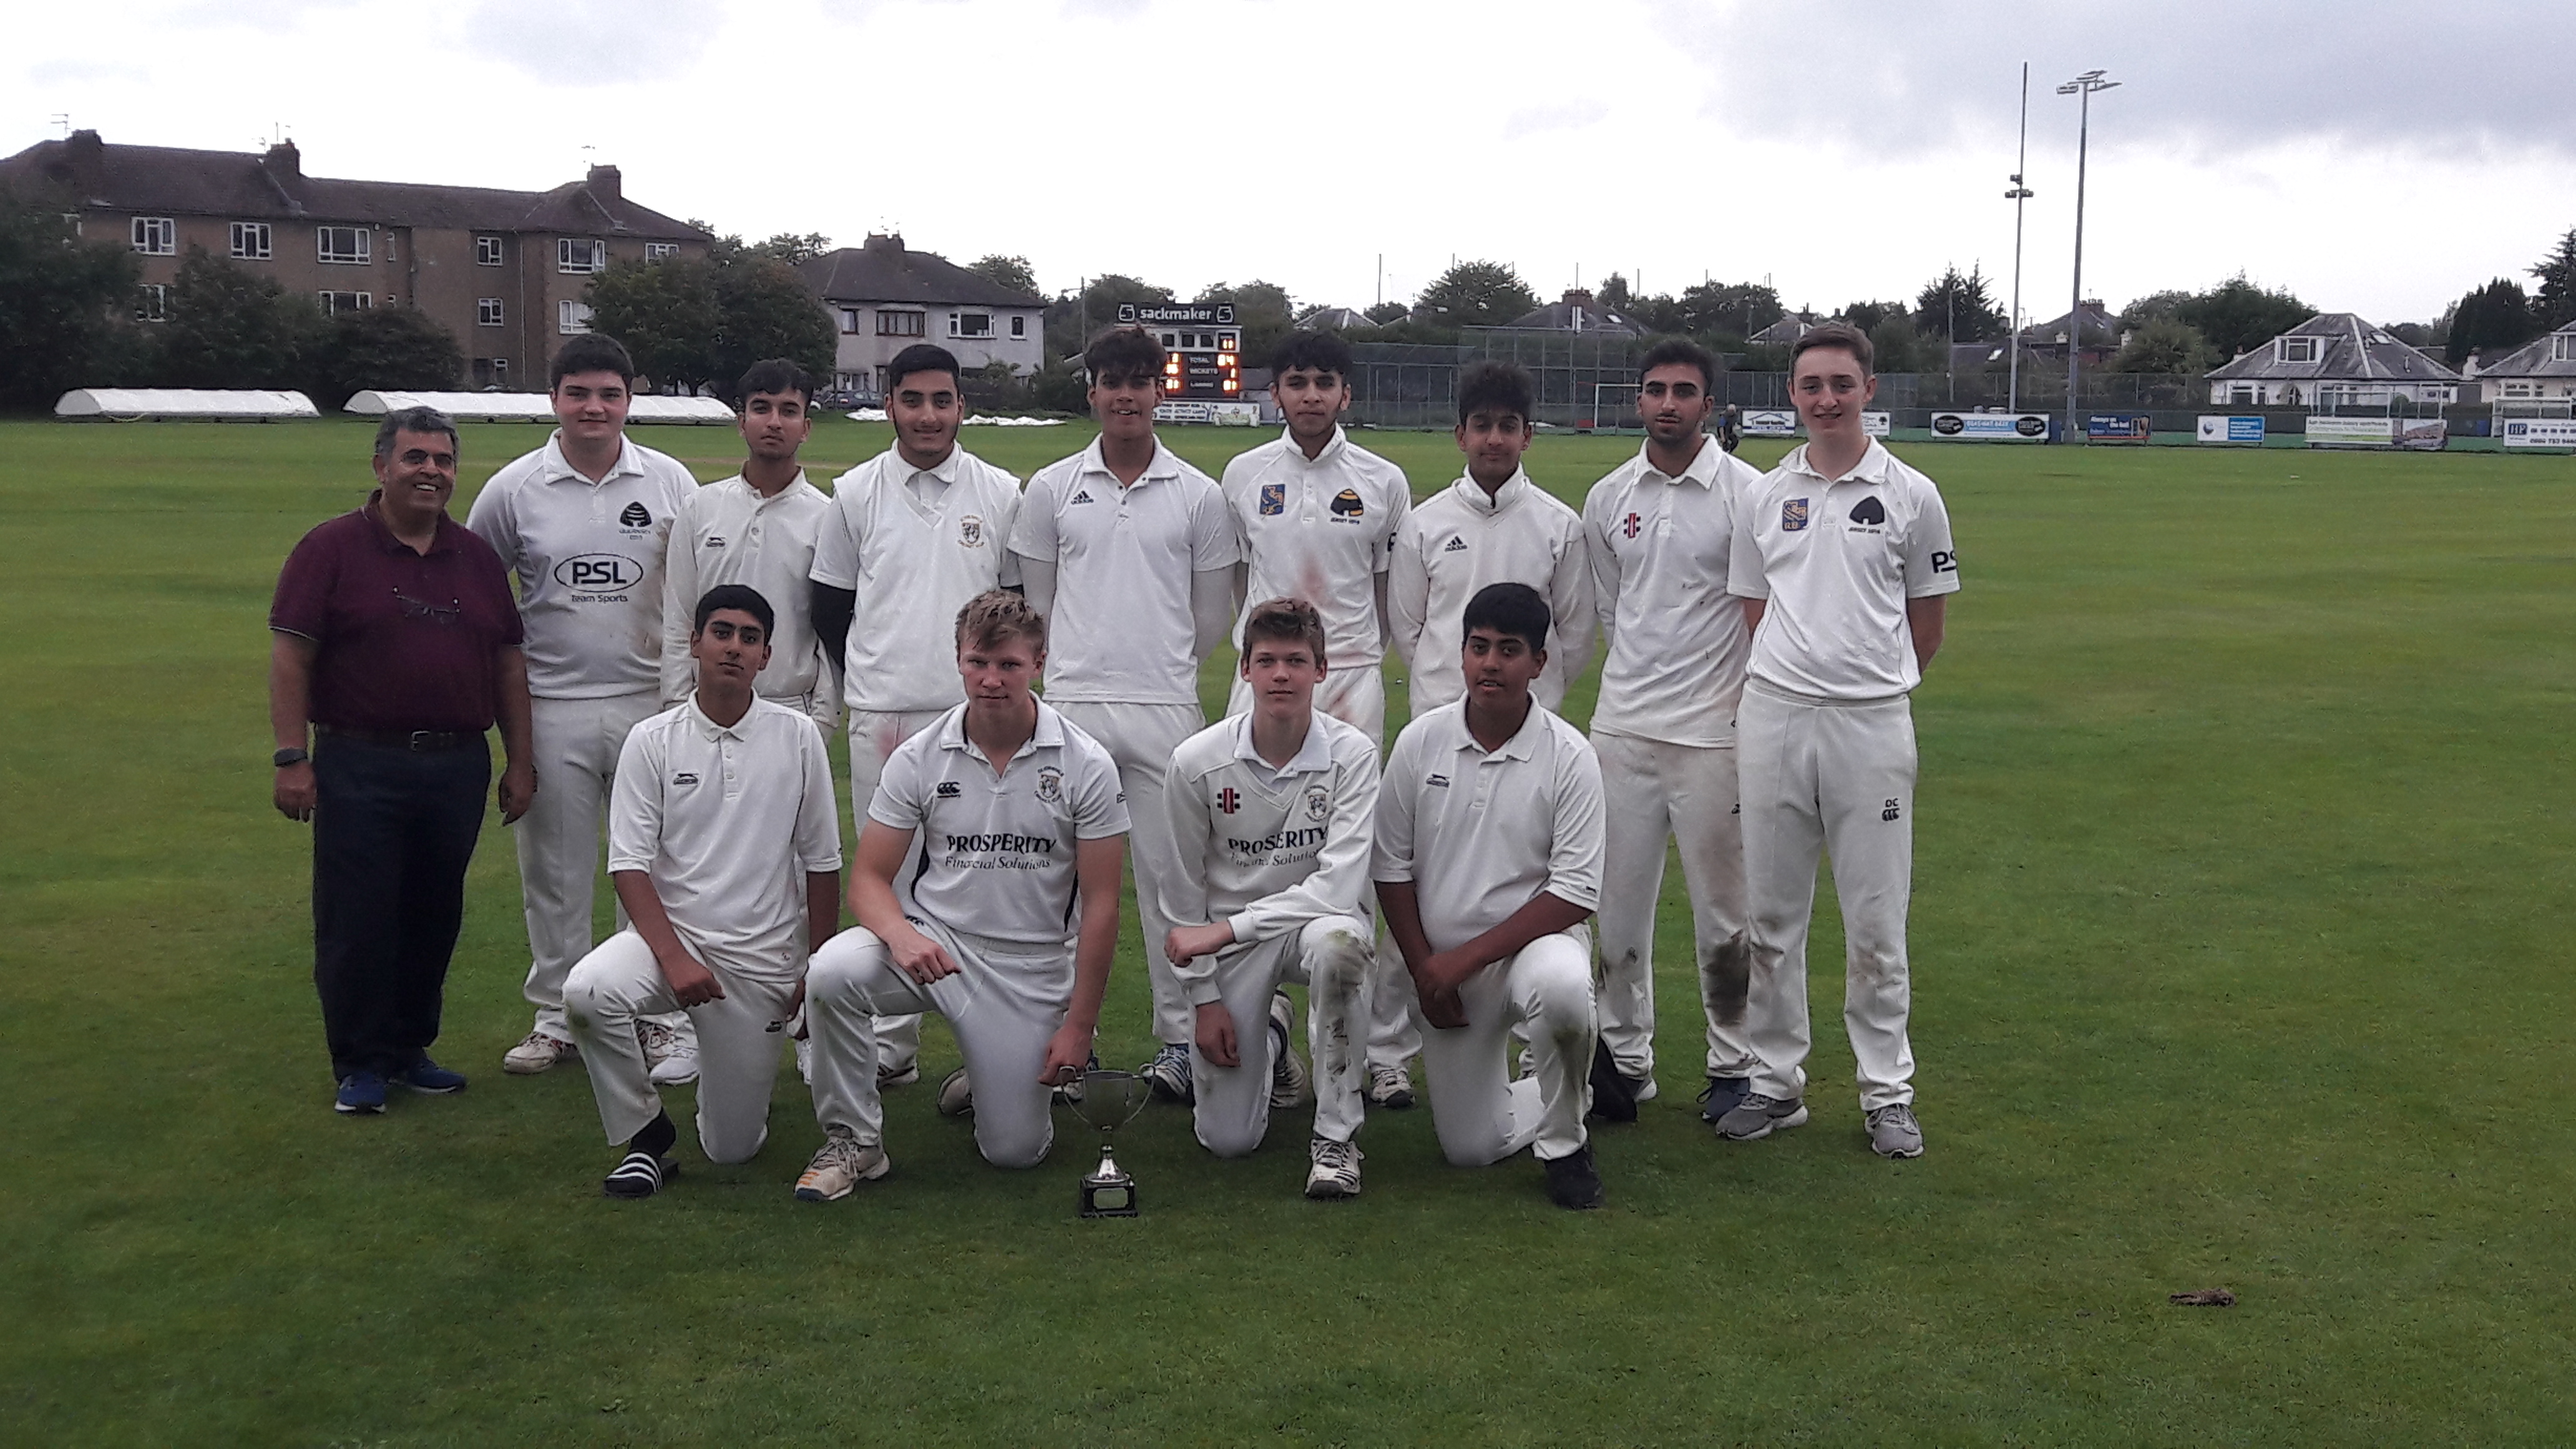 Clydesdale Clinch the U18 Club Championship